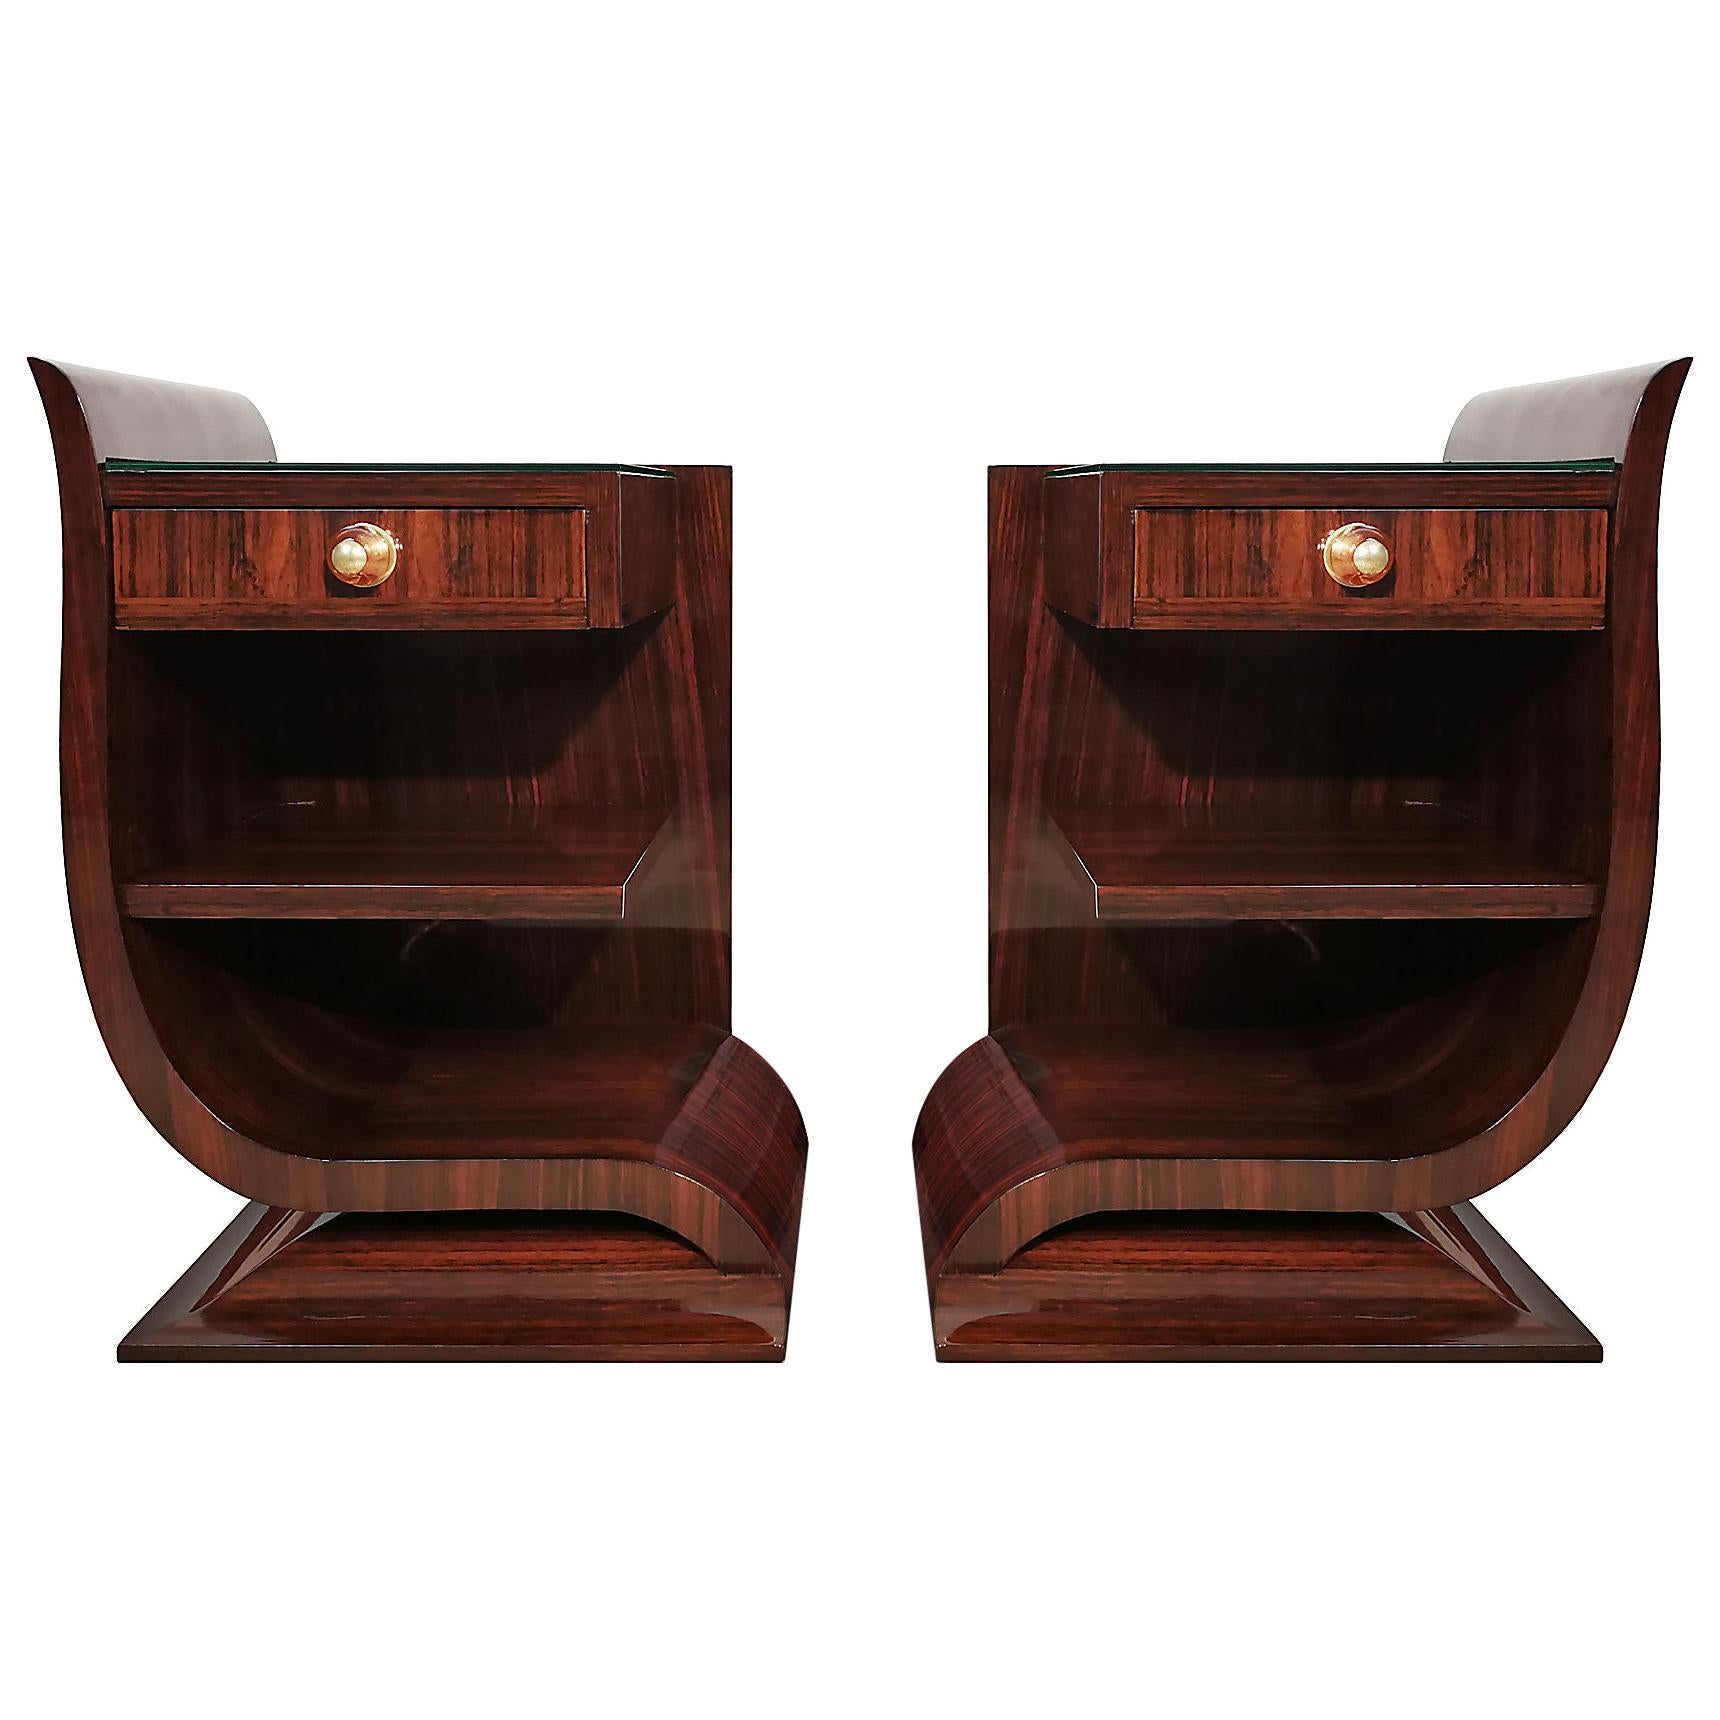 1930s Art Deco Asymmetrical and Rounded Nightstands, Mahogany, Glass, France